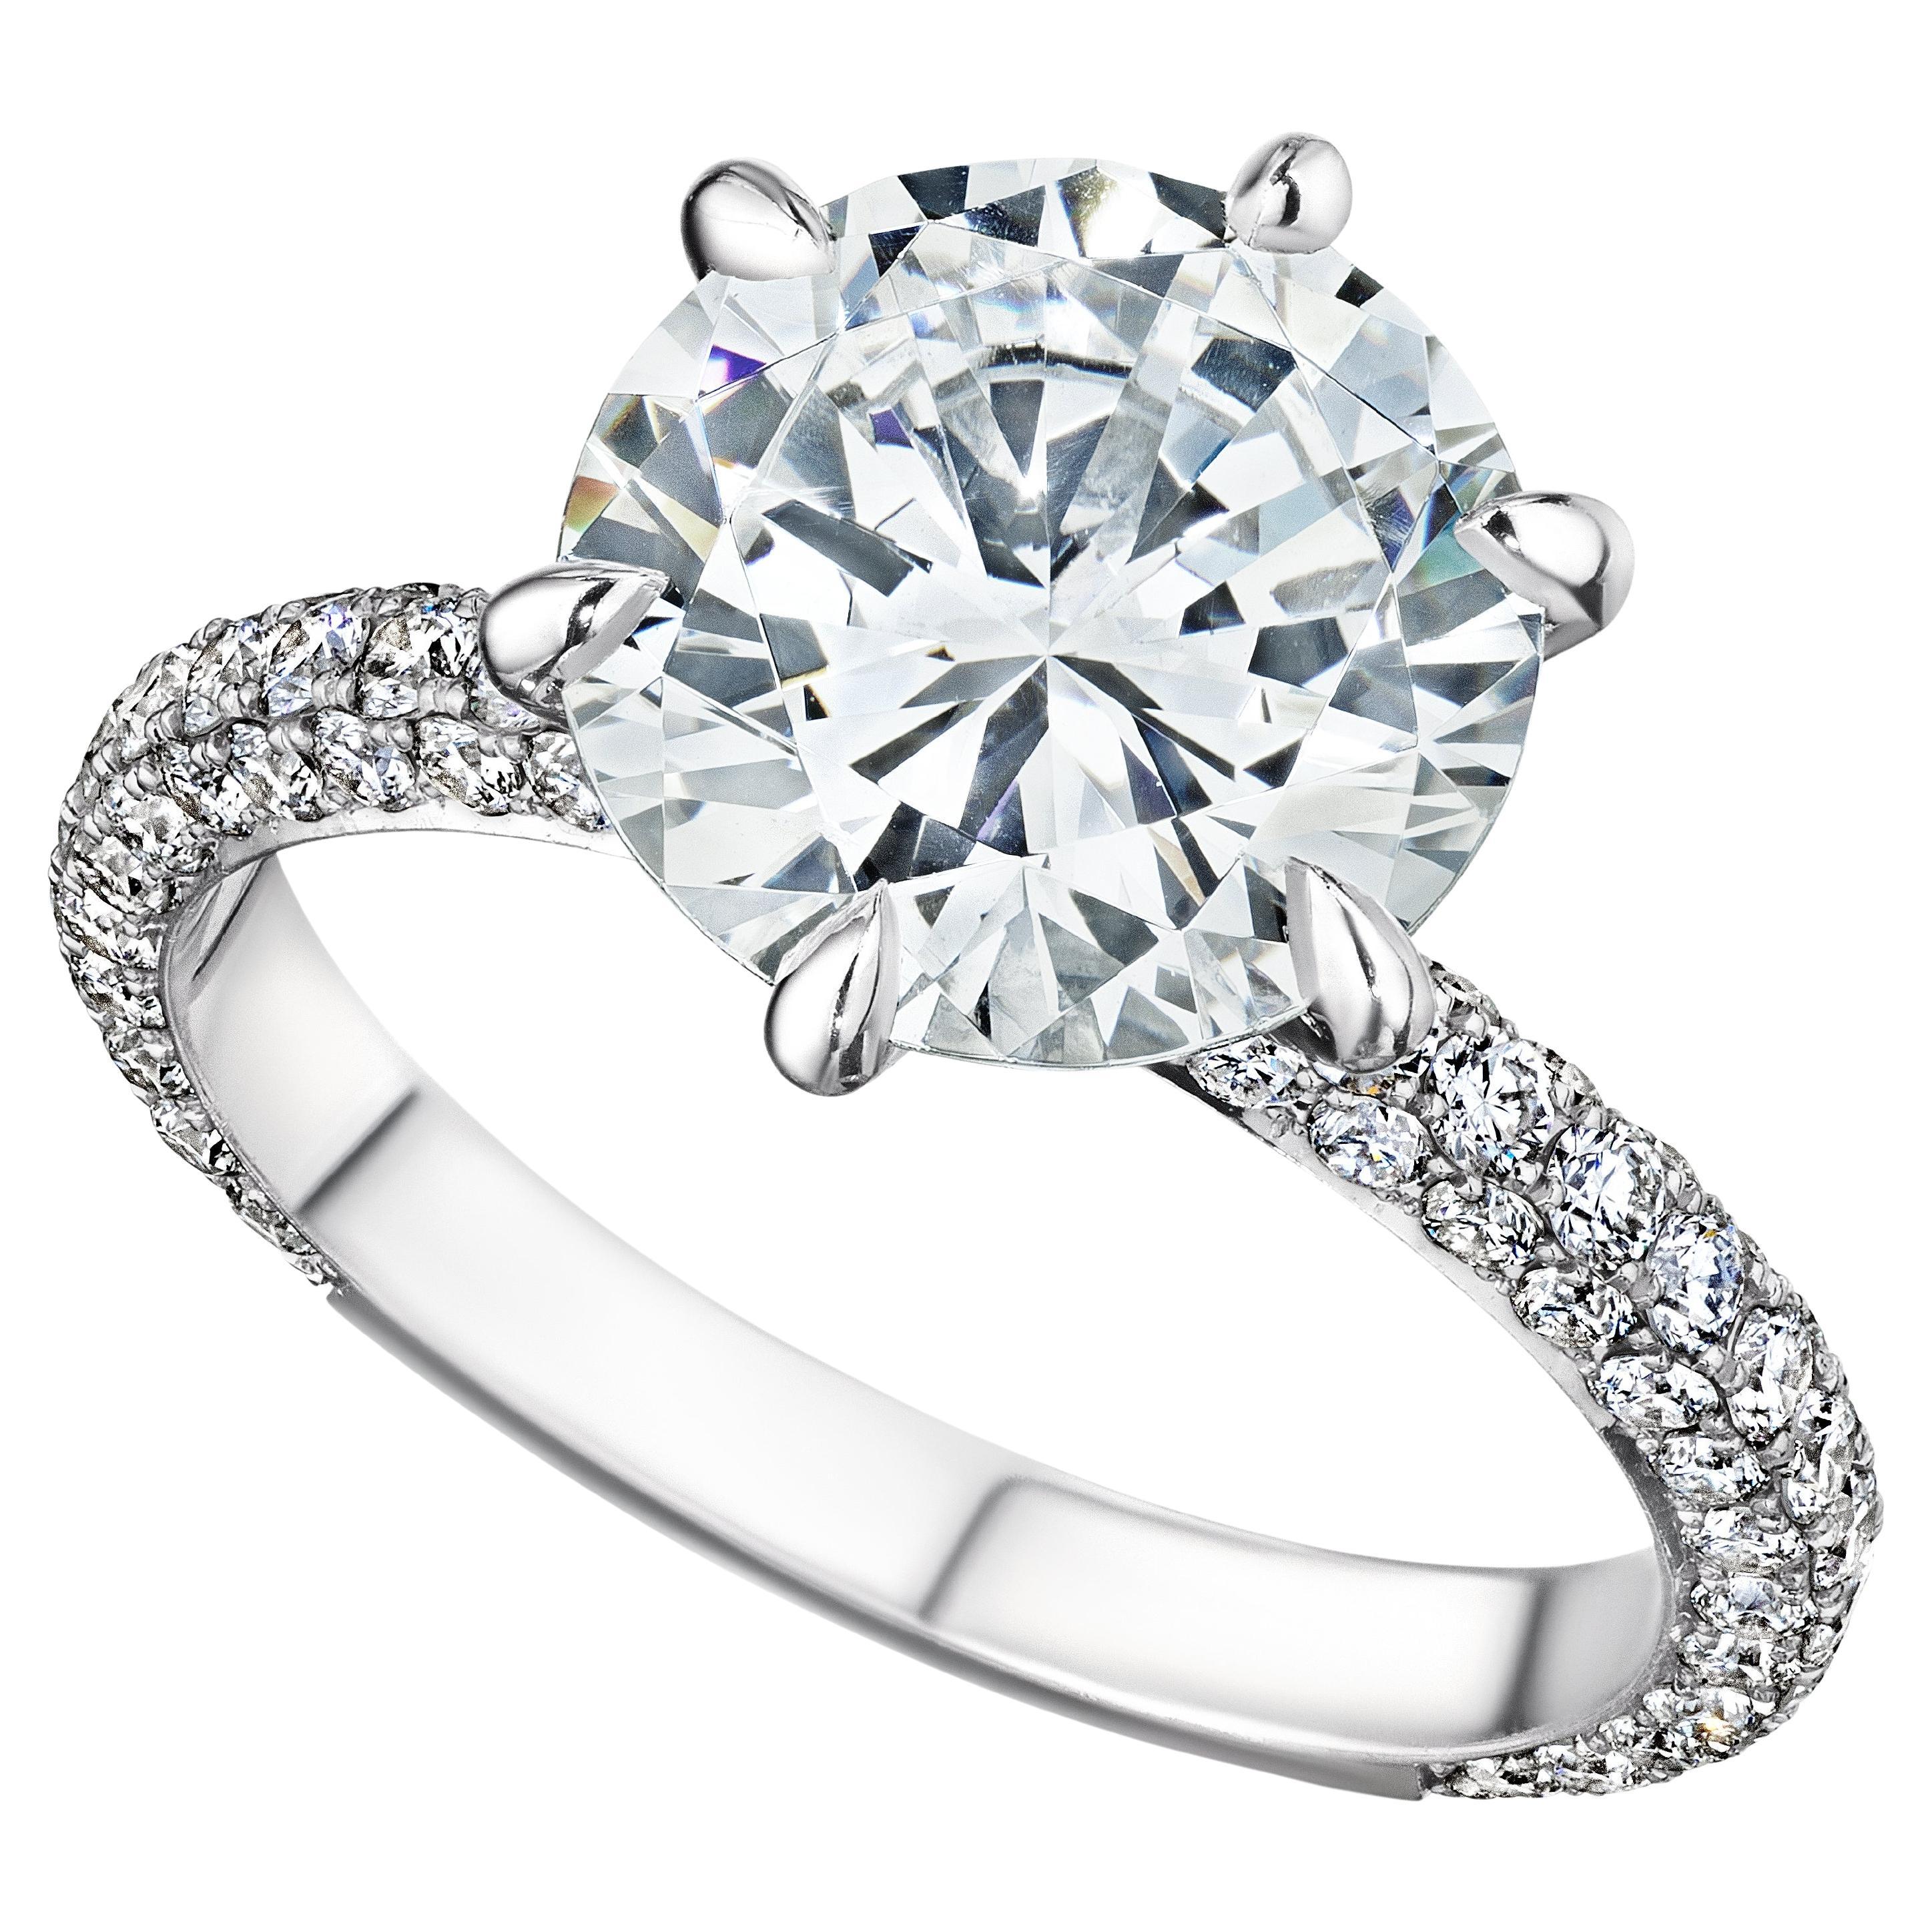 GIA Certified 3.50 Carat E VS1 Round Diamond Engagement Ring "Elle" For Sale